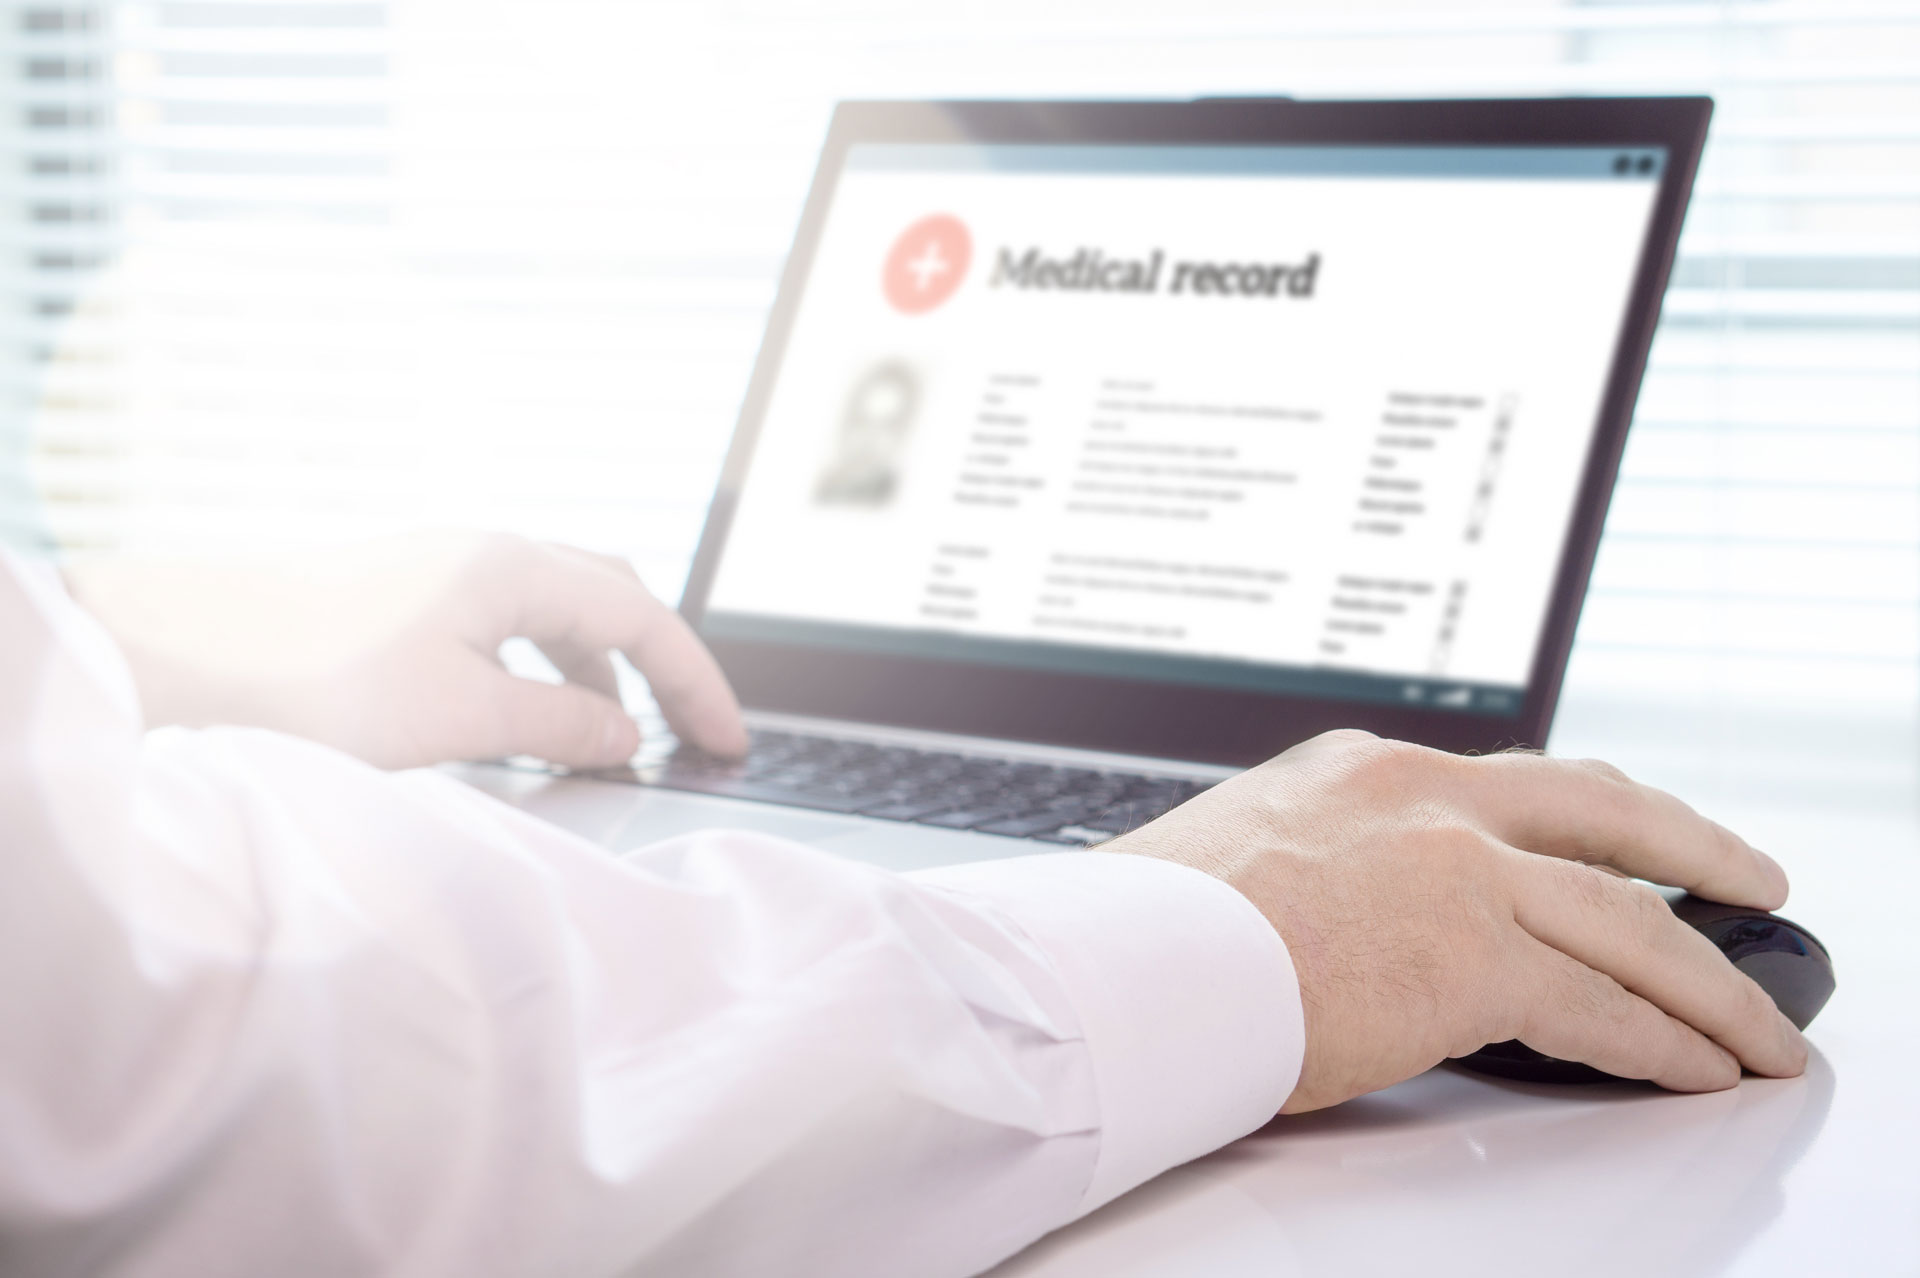 Patient Data in a Medical Record